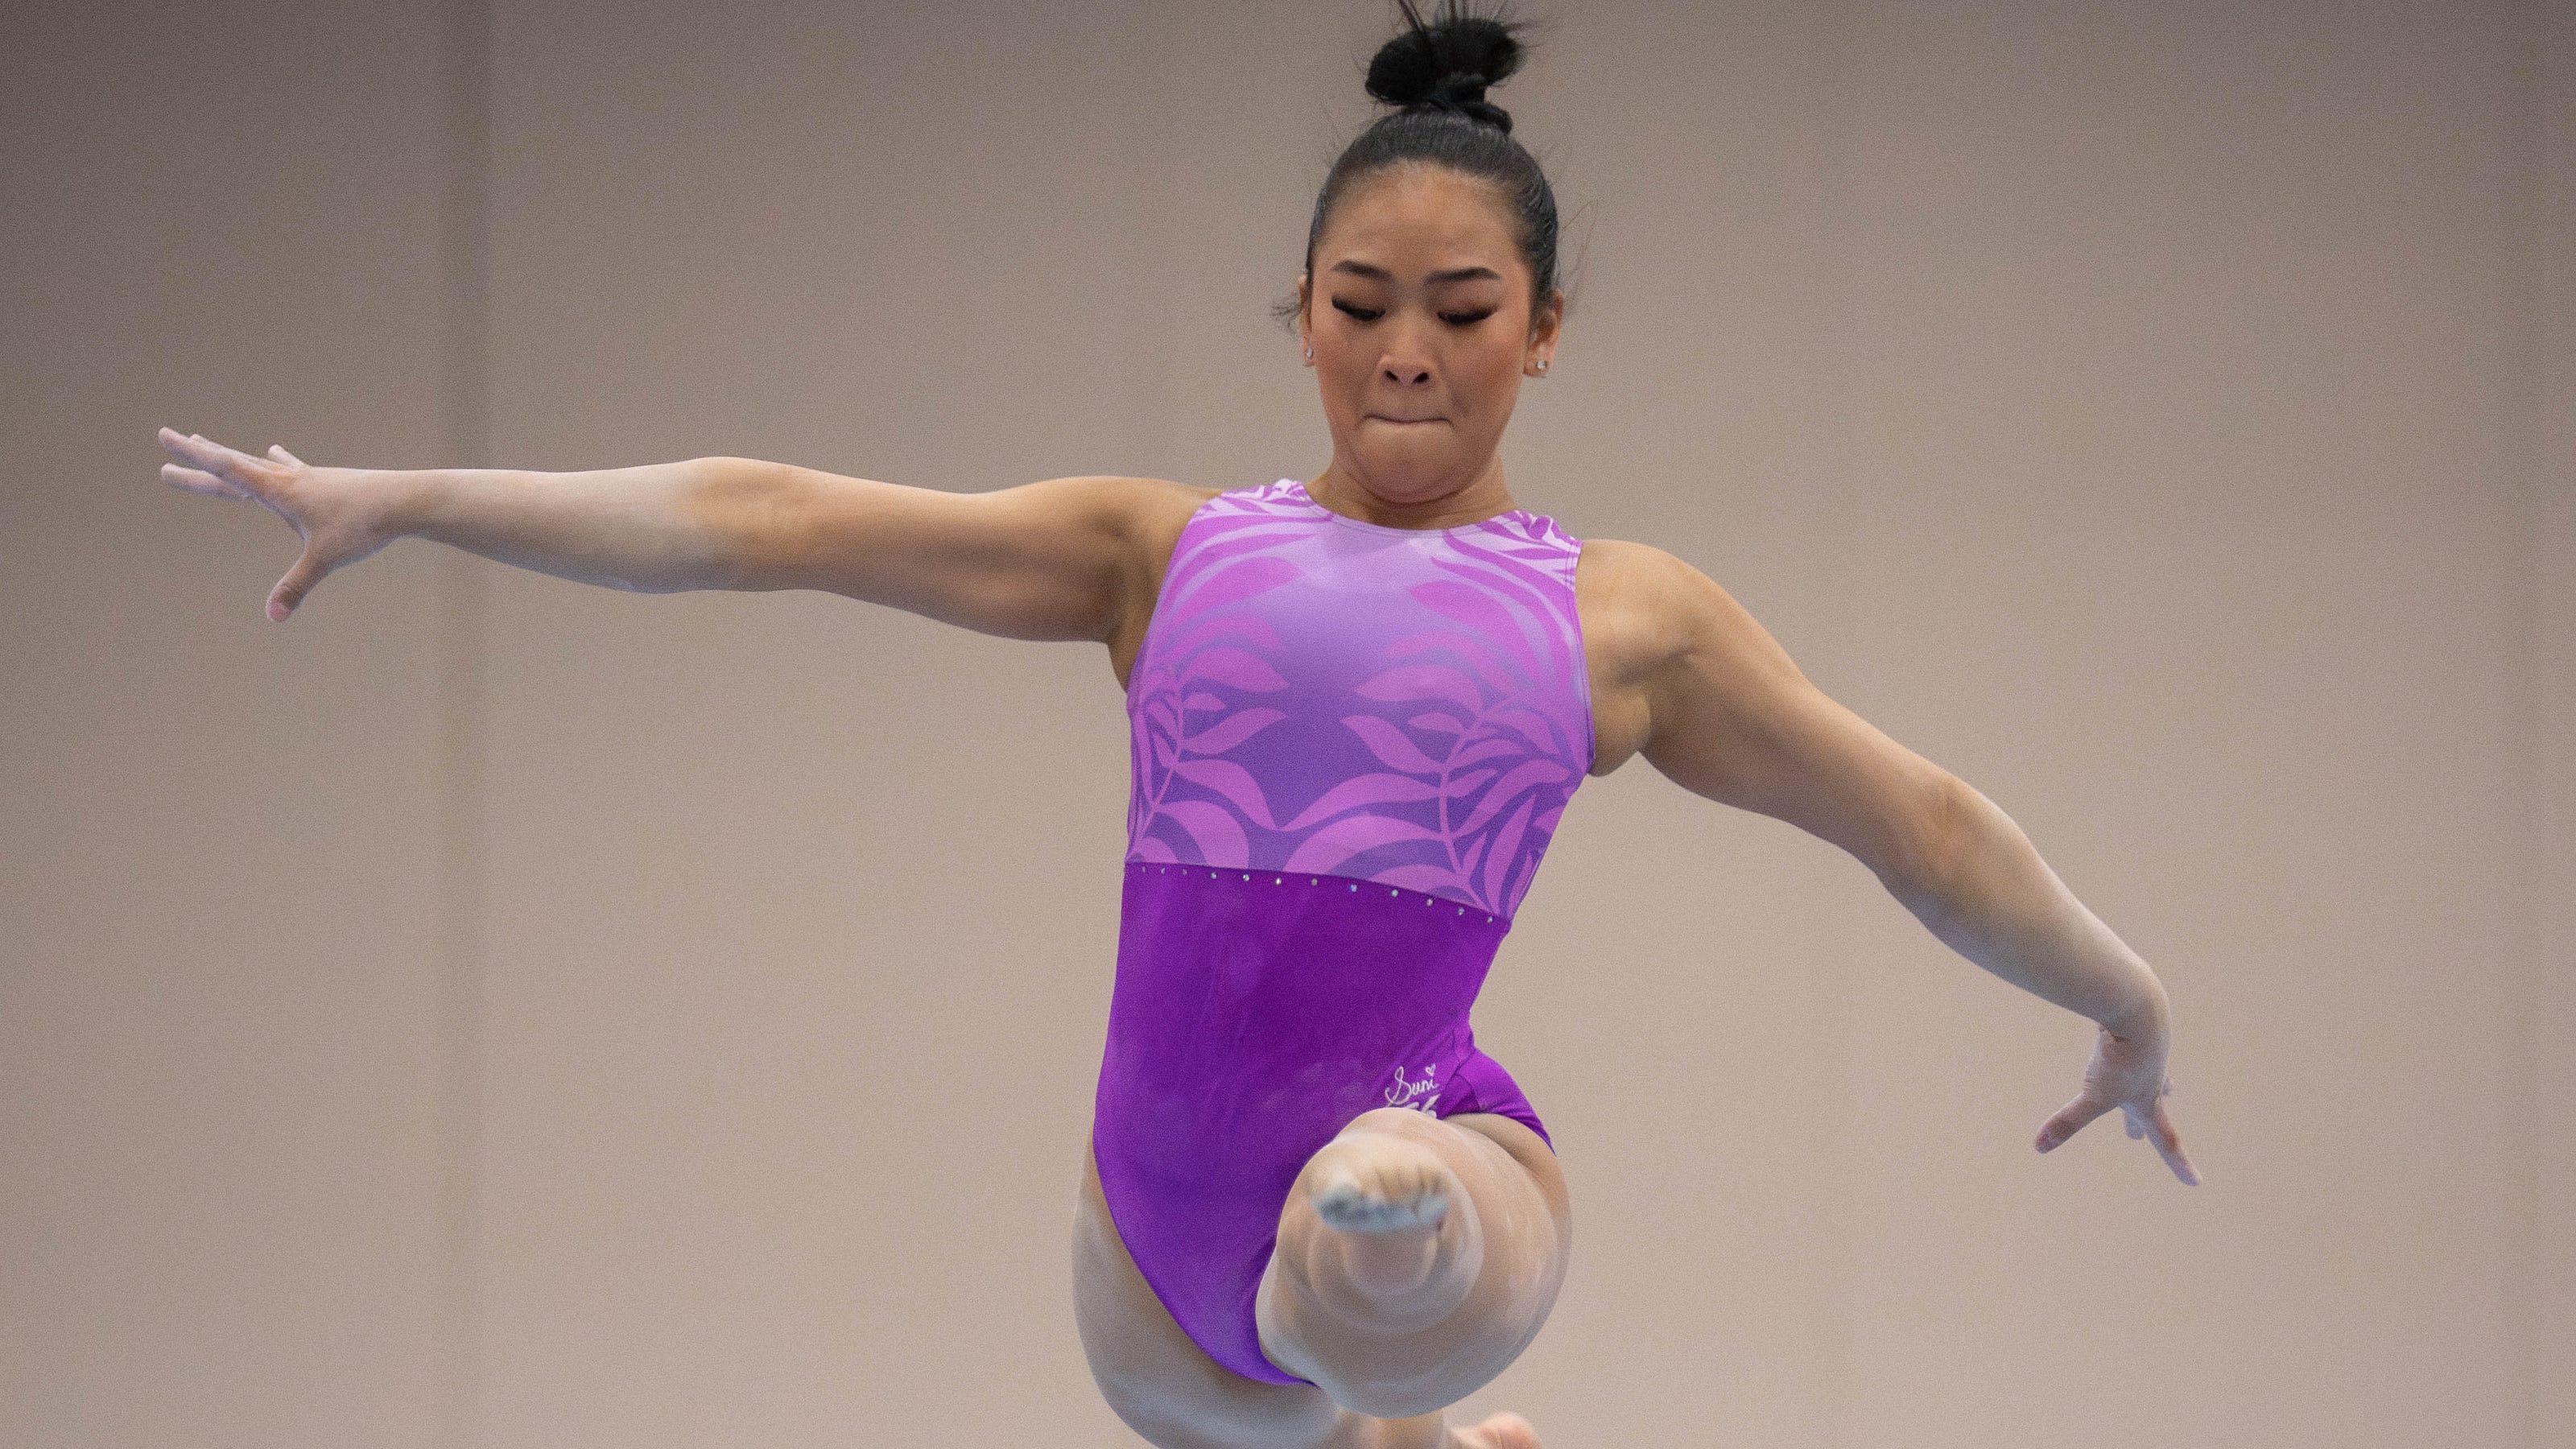 U.S. gymnastics must find a way to make the puzzle pieces fit to build Olympic team